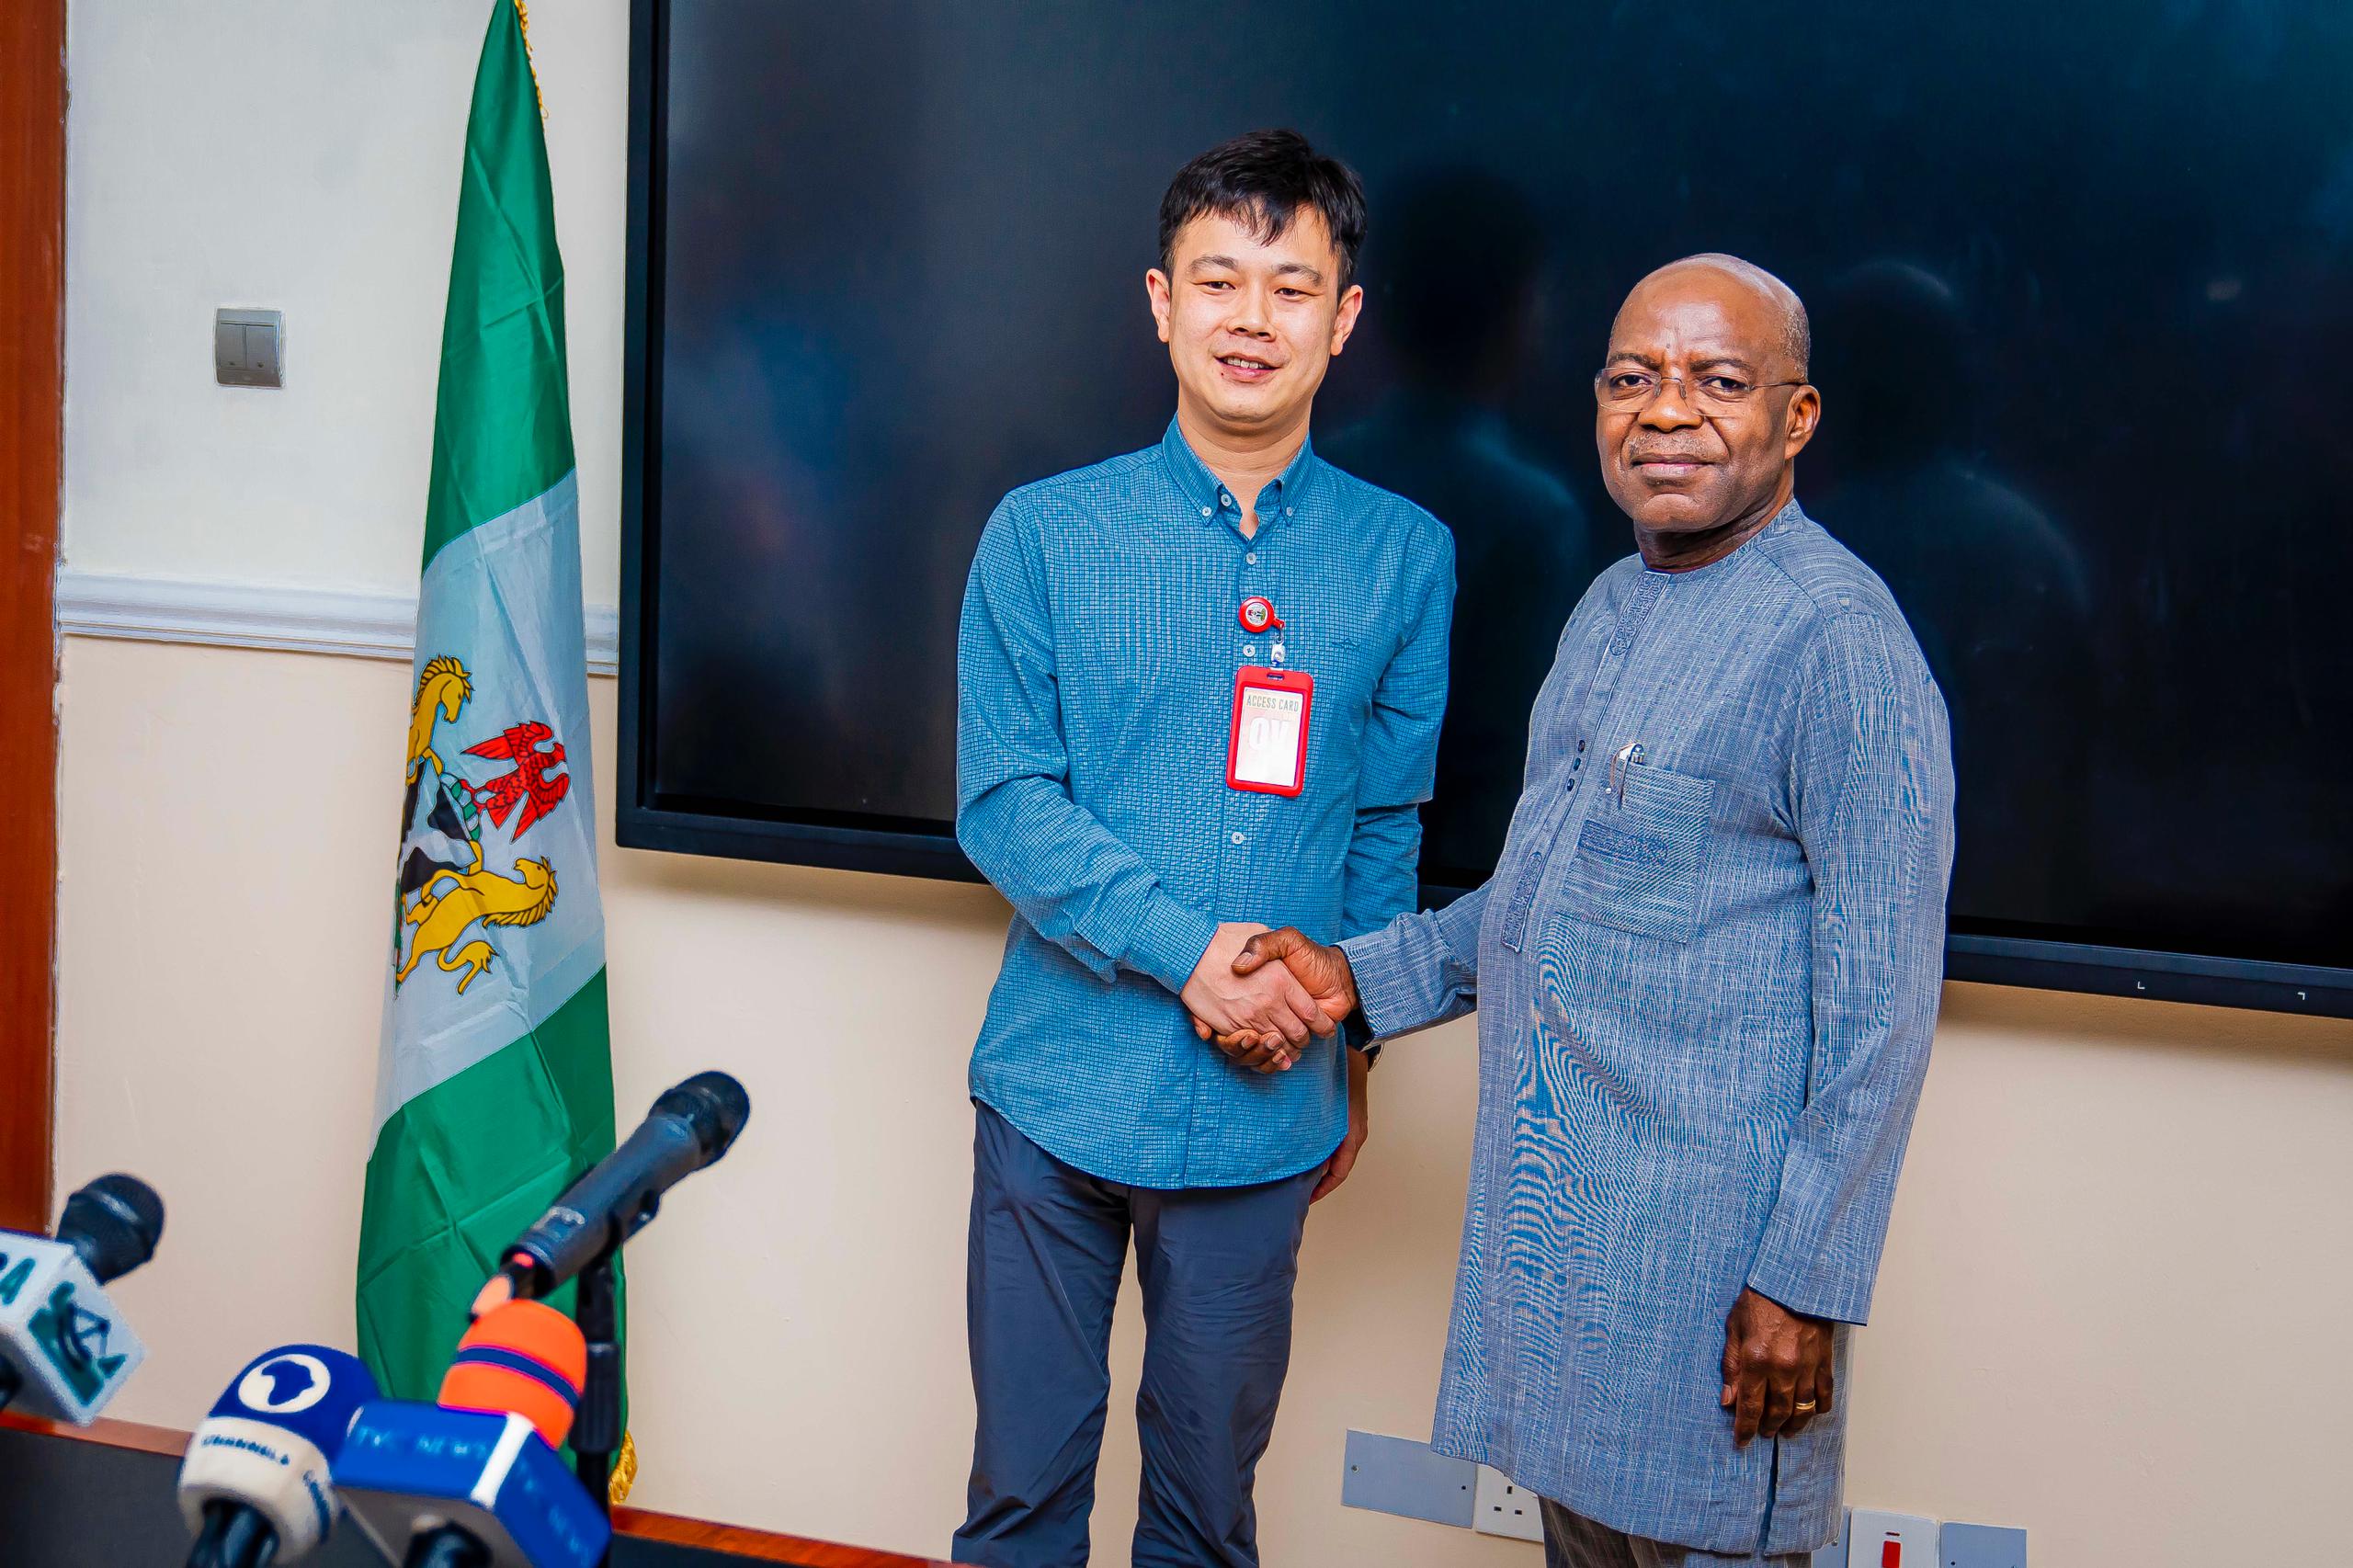 Our Policies Geared Towards Growing Businesses, Attracting New Ones, Gov Otti Tells Chinese Firm